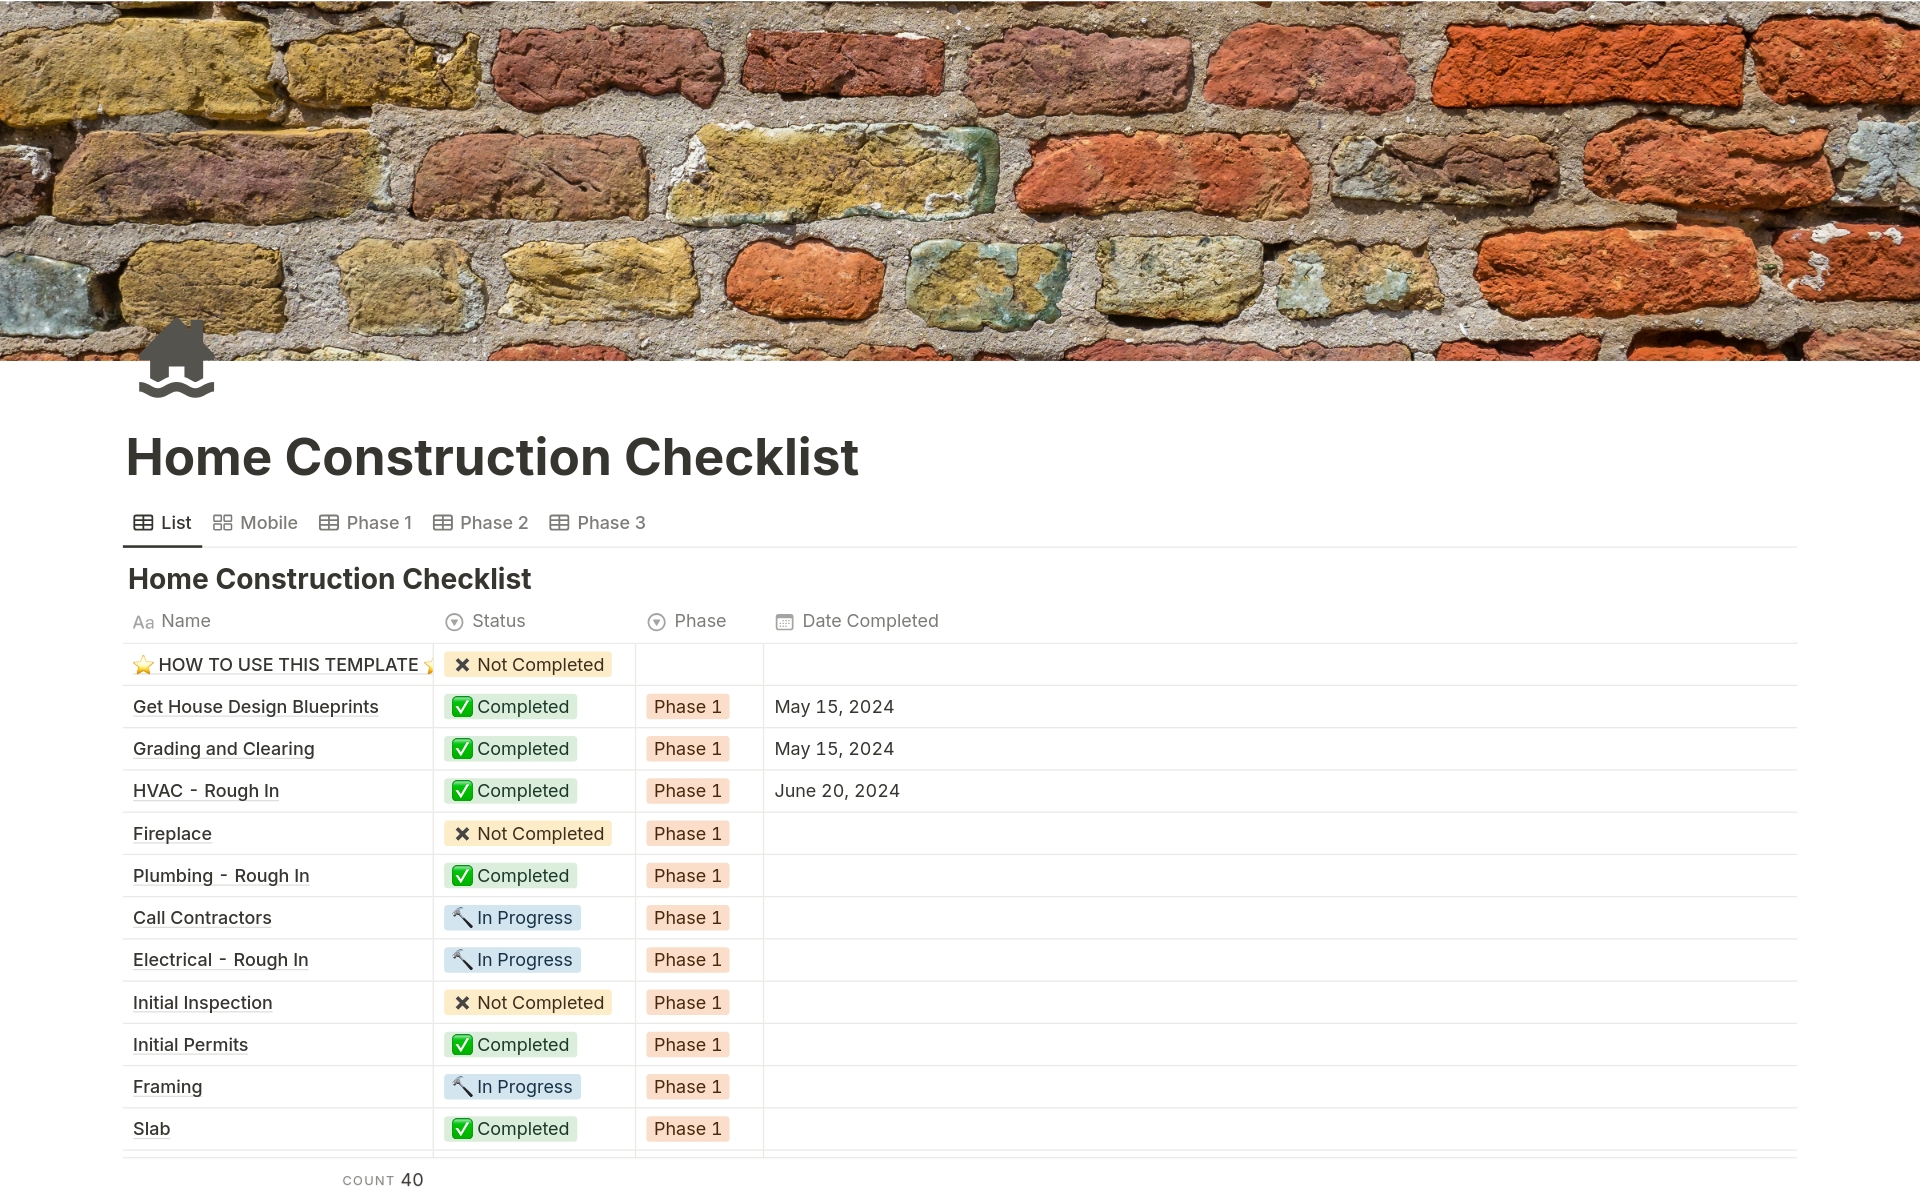 Keep track of your home construction or renovation project with this task checklist ✅.  A FREE ready-to-use Notion Home Construction and Renovation Checklist.

